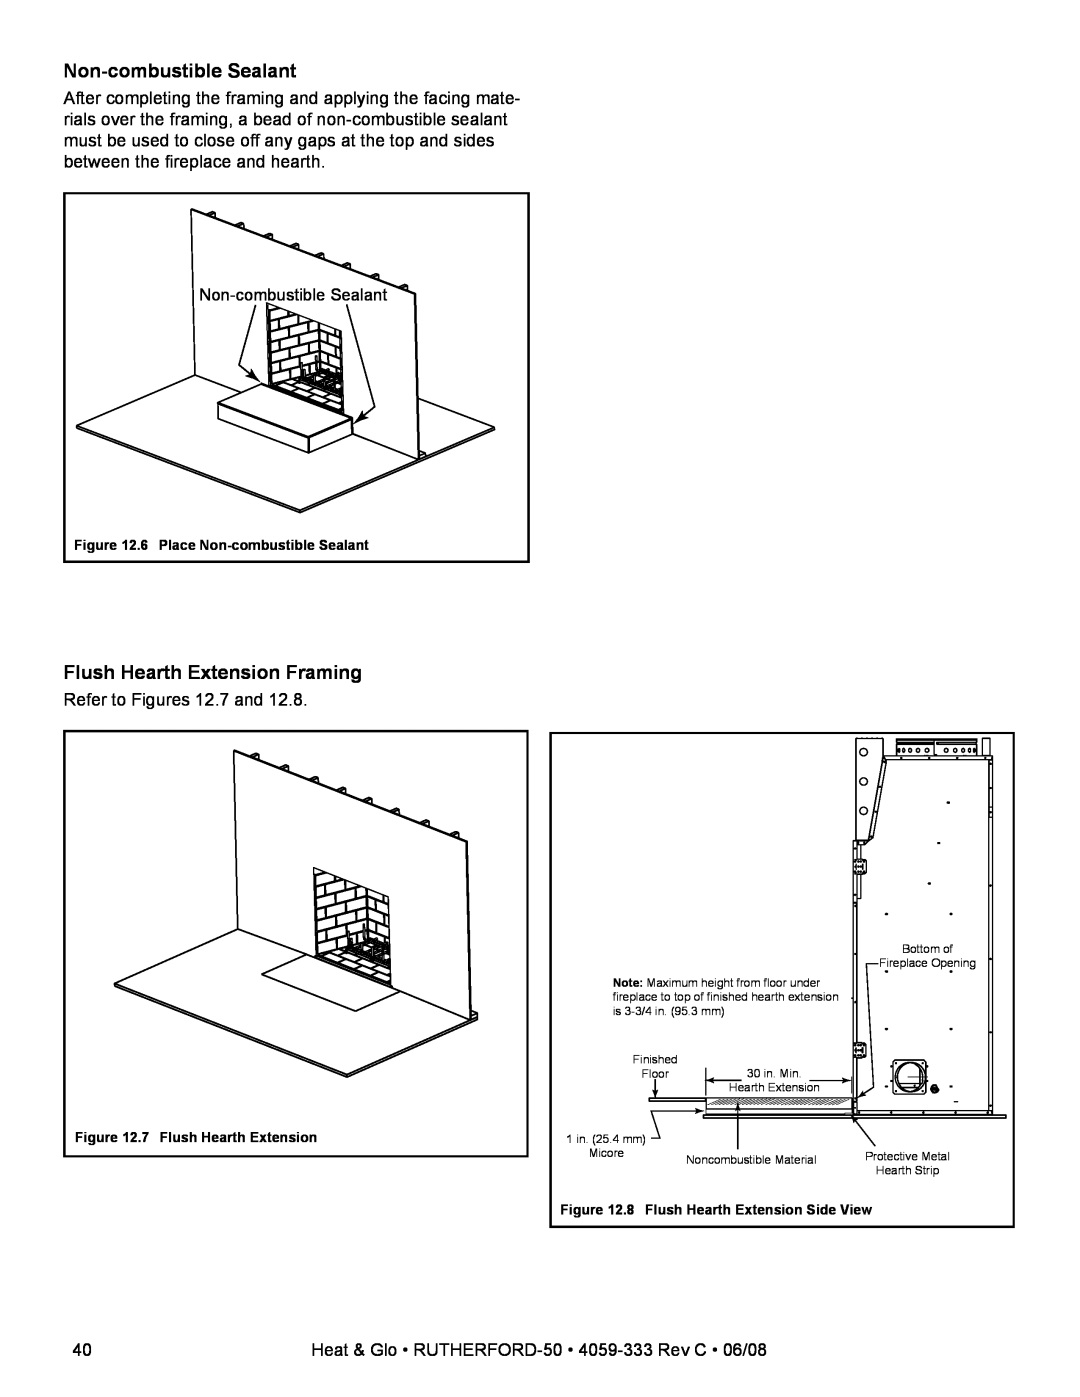 Heat & Glo LifeStyle 50 owner manual Non-combustibleSealant, Flush Hearth Extension Framing 